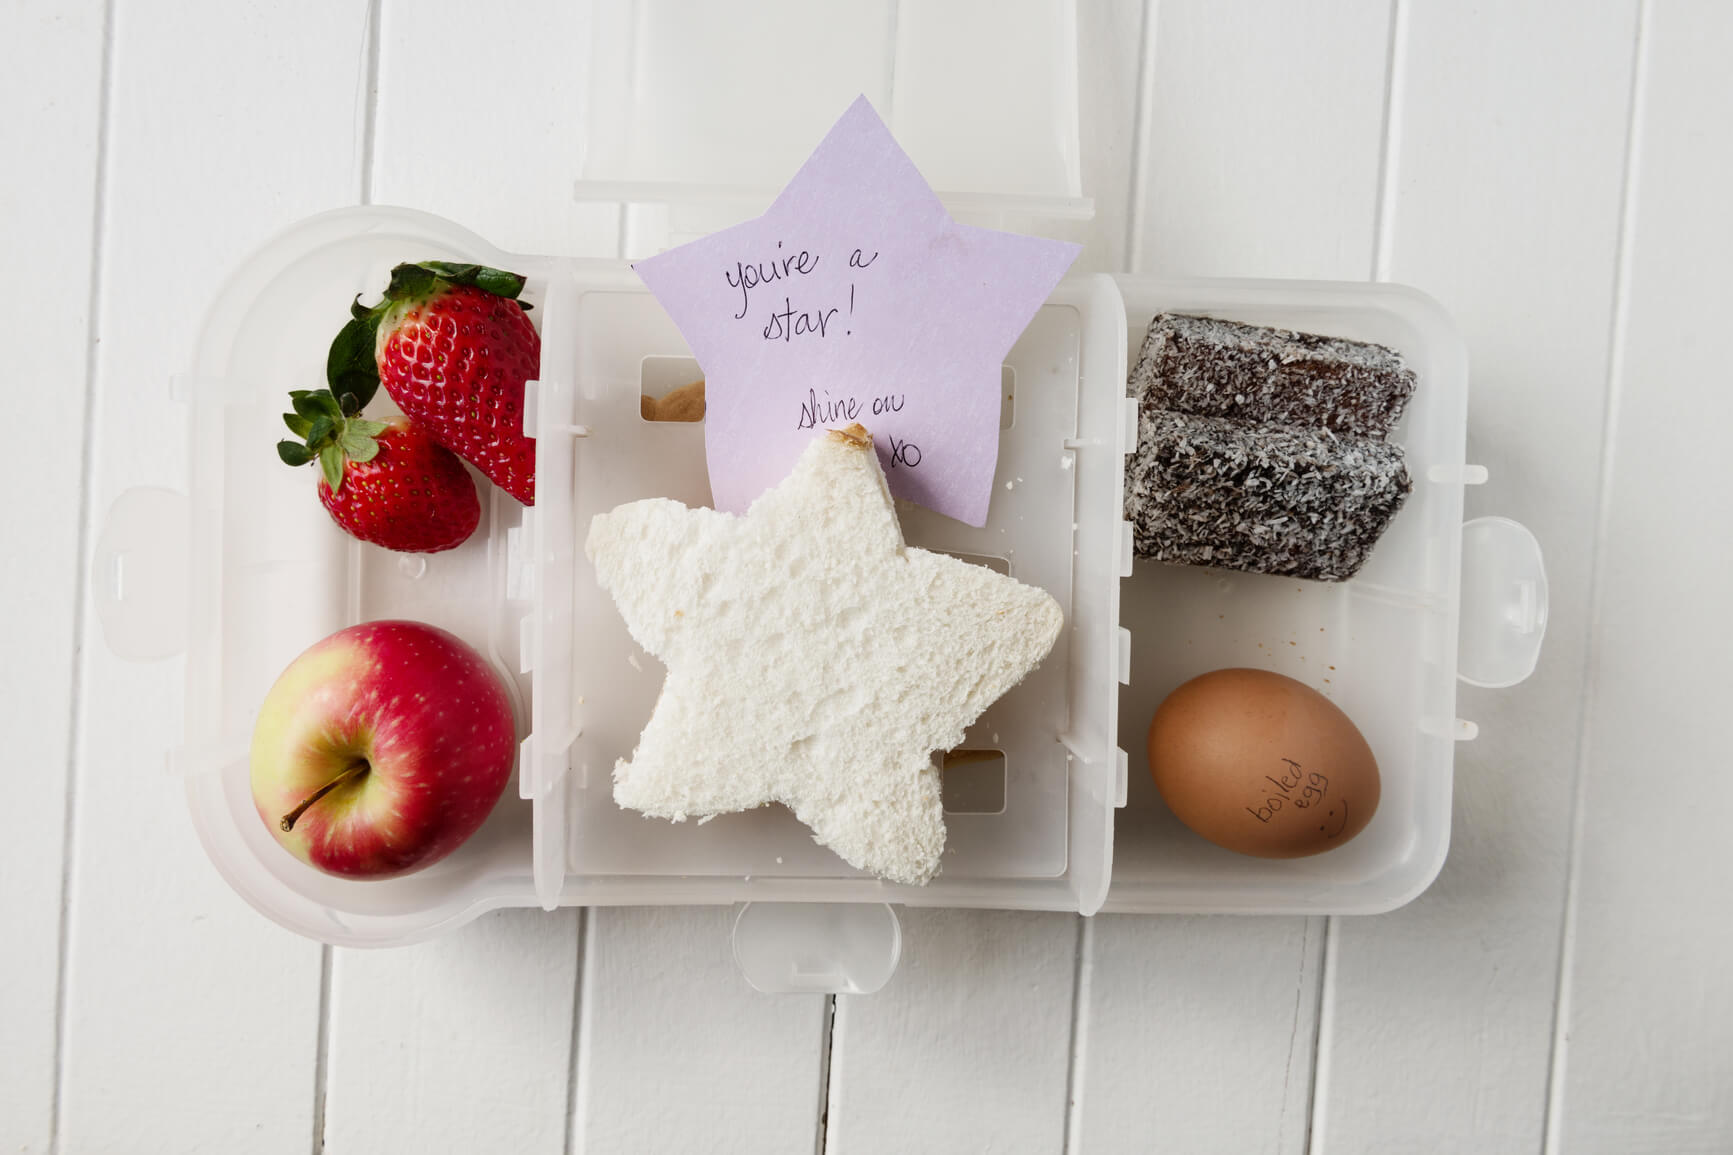 Balance kids’ lunch boxes with healthy and enjoyable food 